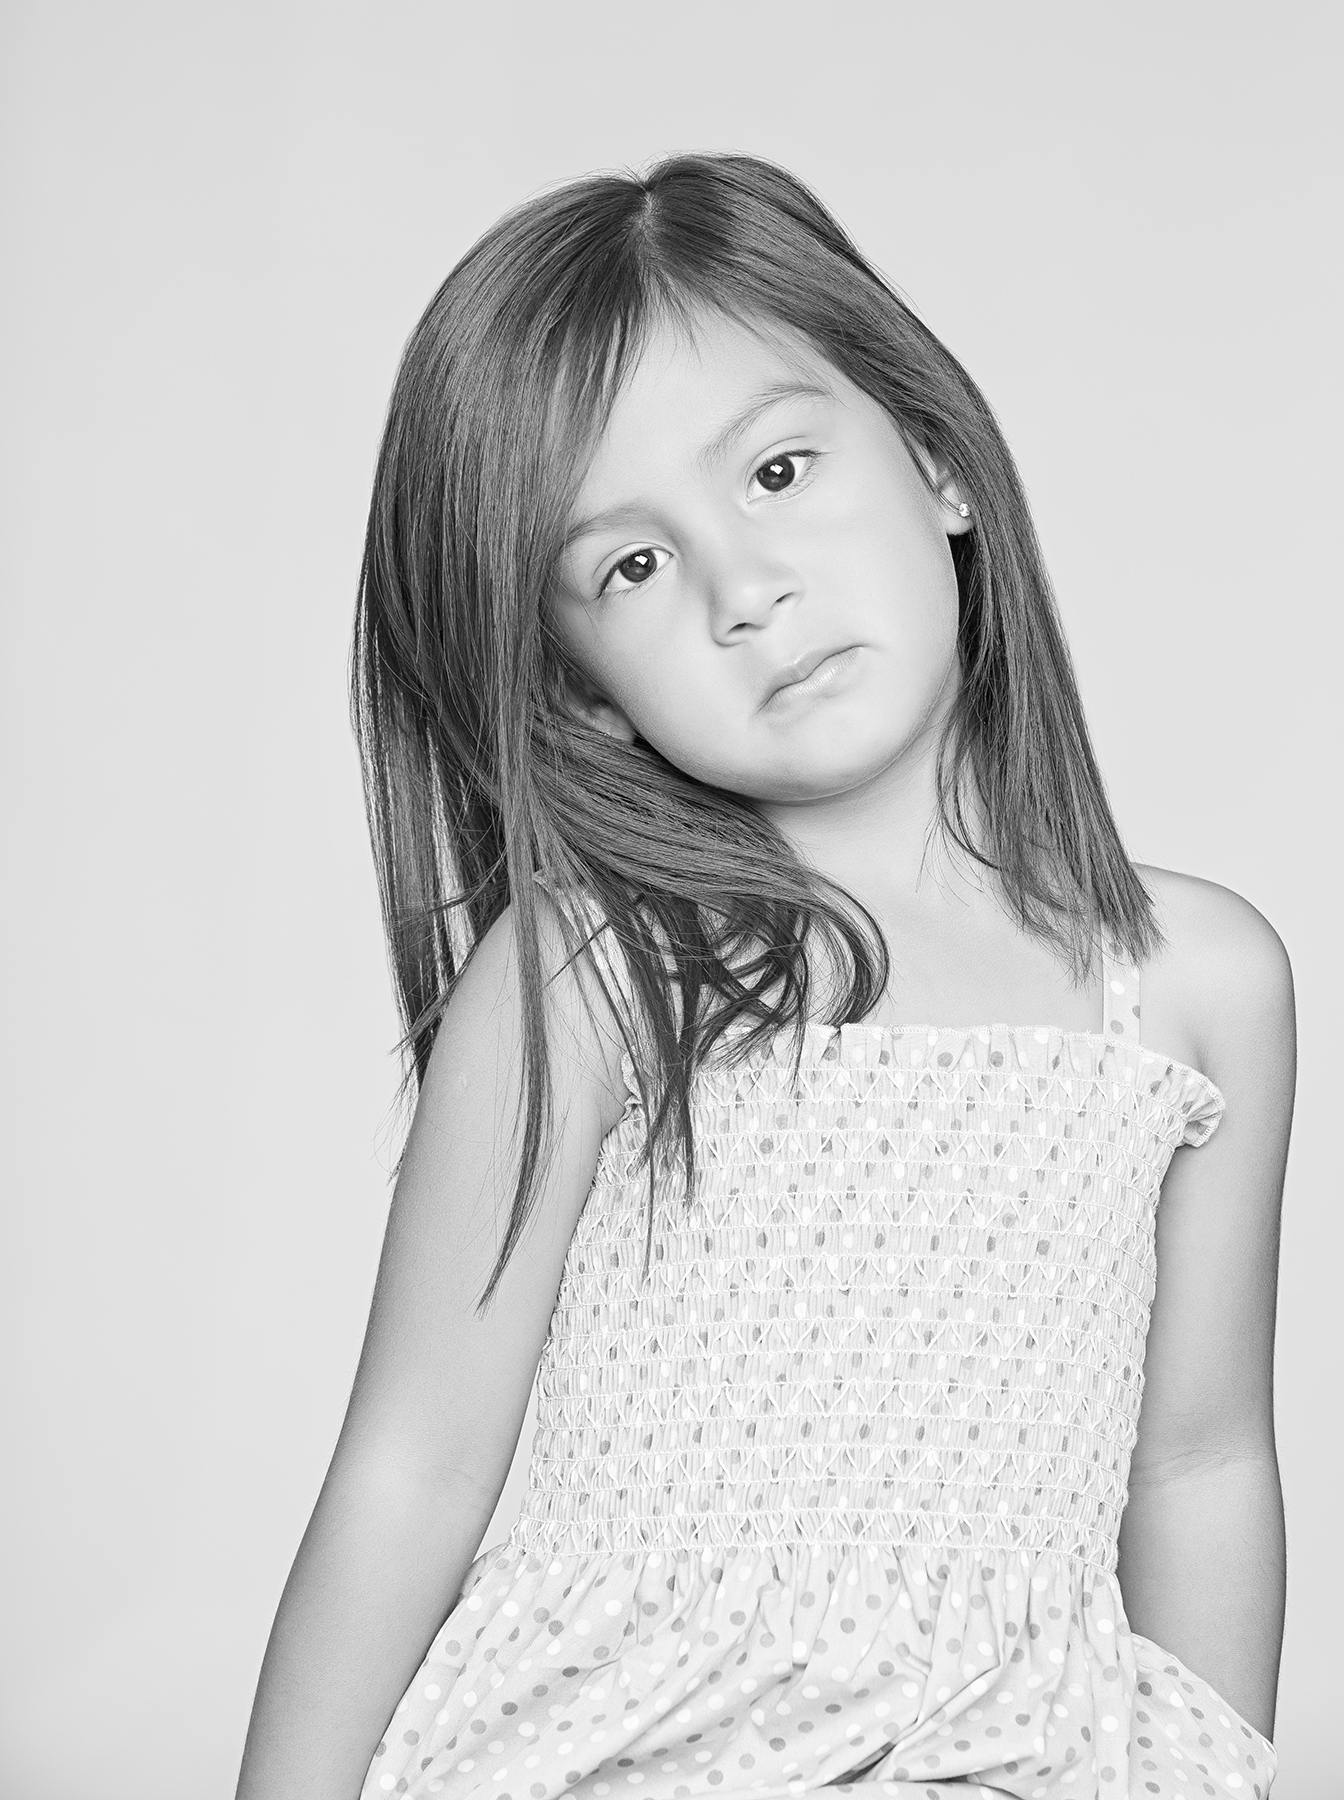  close up photography portrait of a young girl in black and white on a white background for Wyoming Department of Social Services